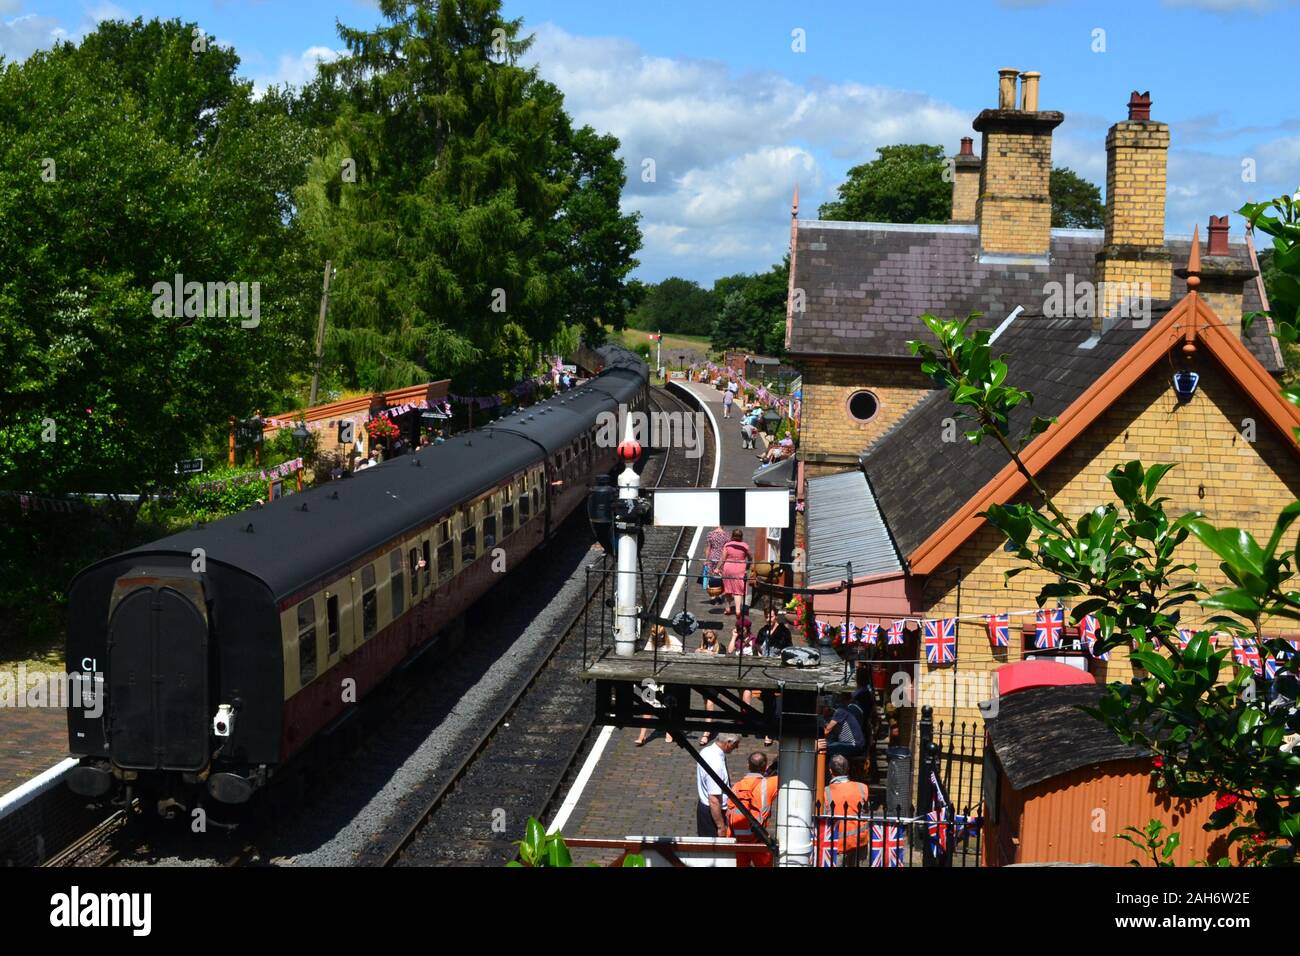 Highly Station on the Severn Valley Railway, during a 1940s weekend, Shropshire, UK Stock Photo